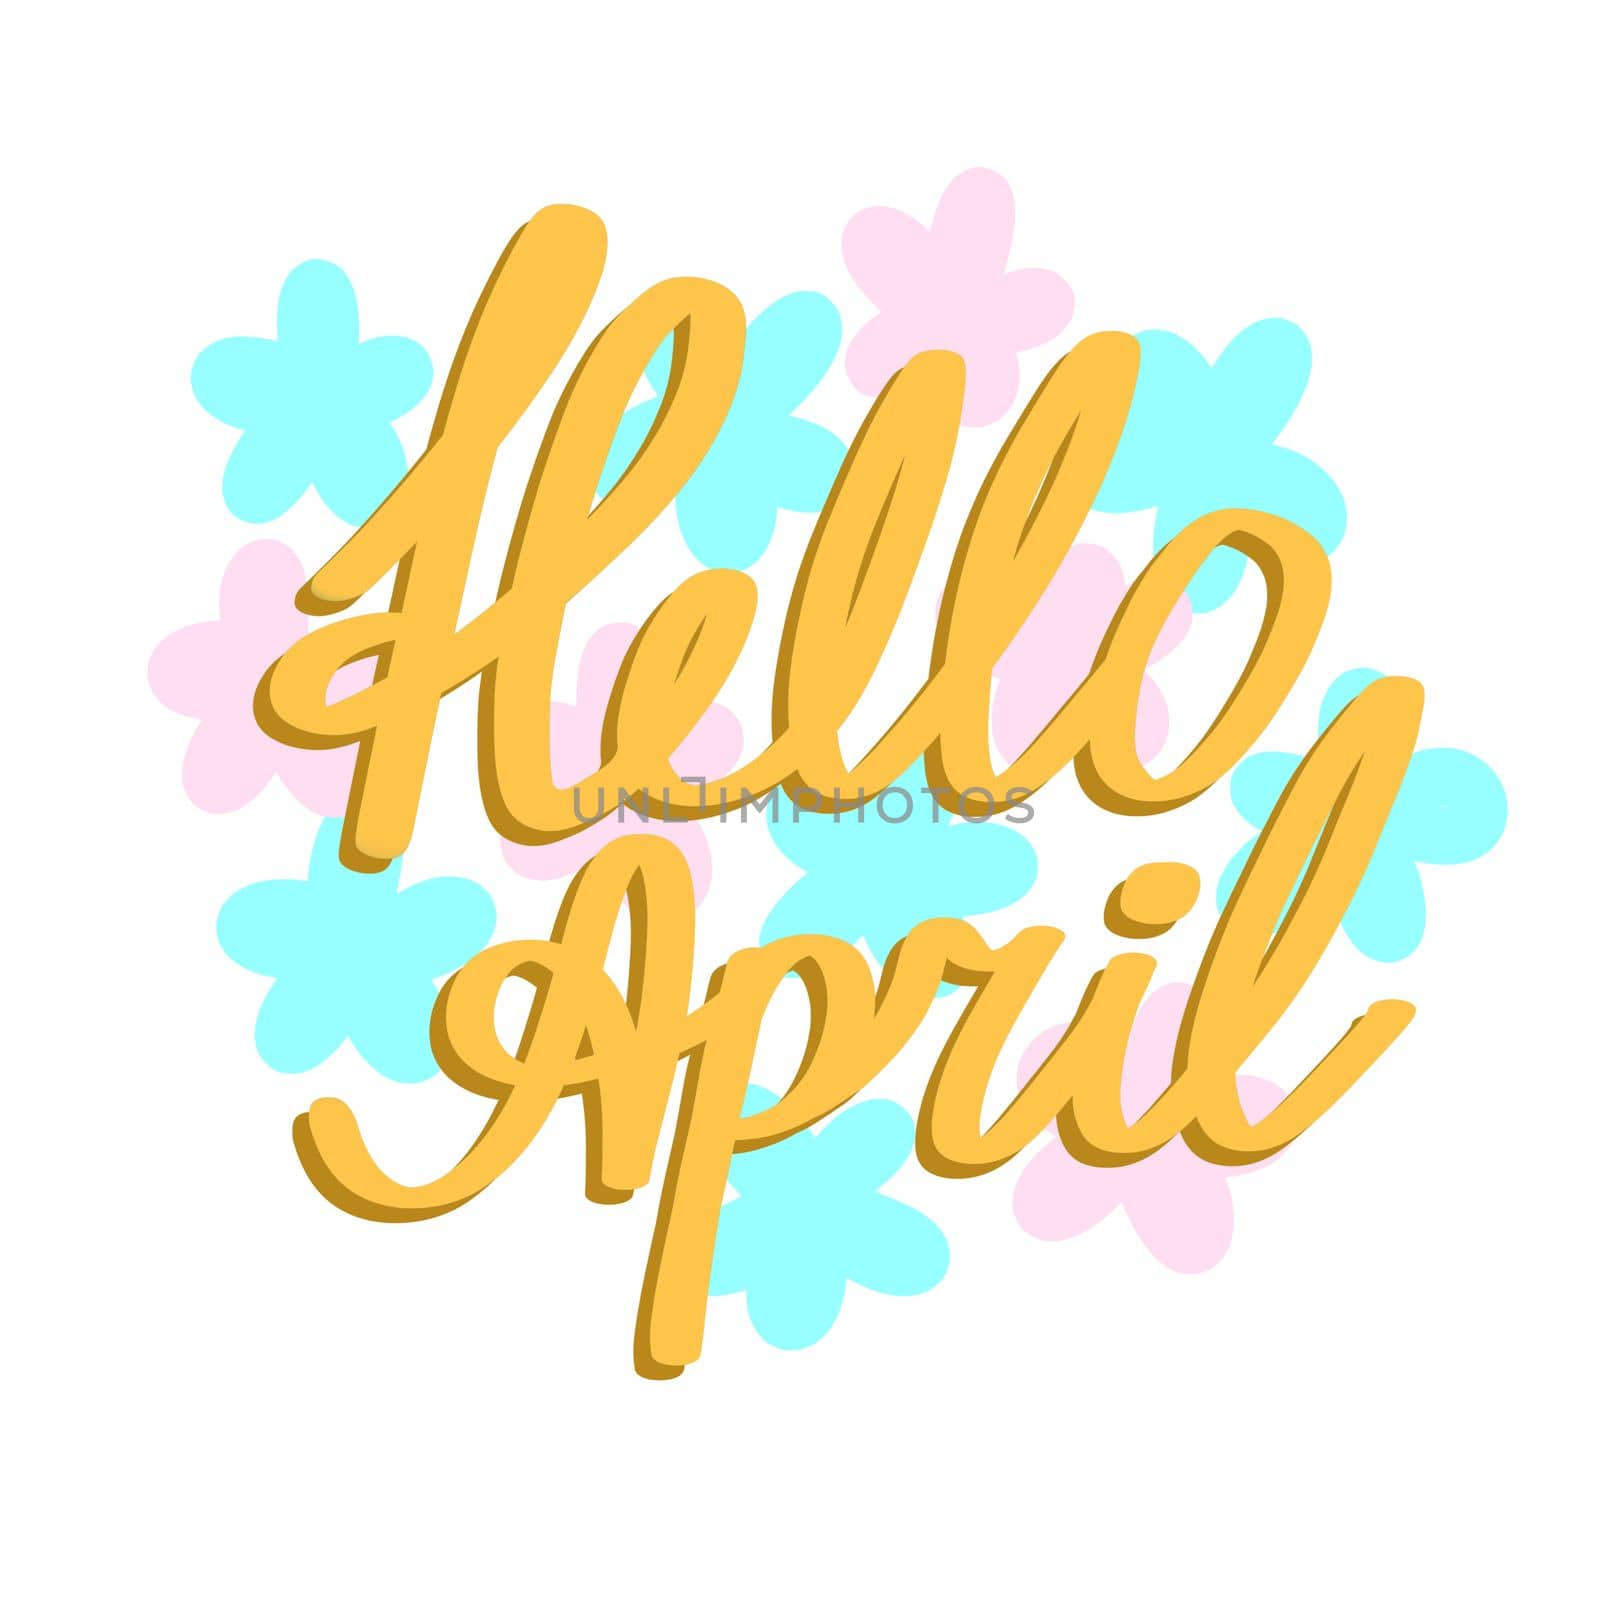 Hello April hand drawn illustration. Spring sticker banner card greeting in pastel colors with flowers leaves nature colorful flora, scrapbooking bullet journal label, lettering calligraphy words. by Lagmar